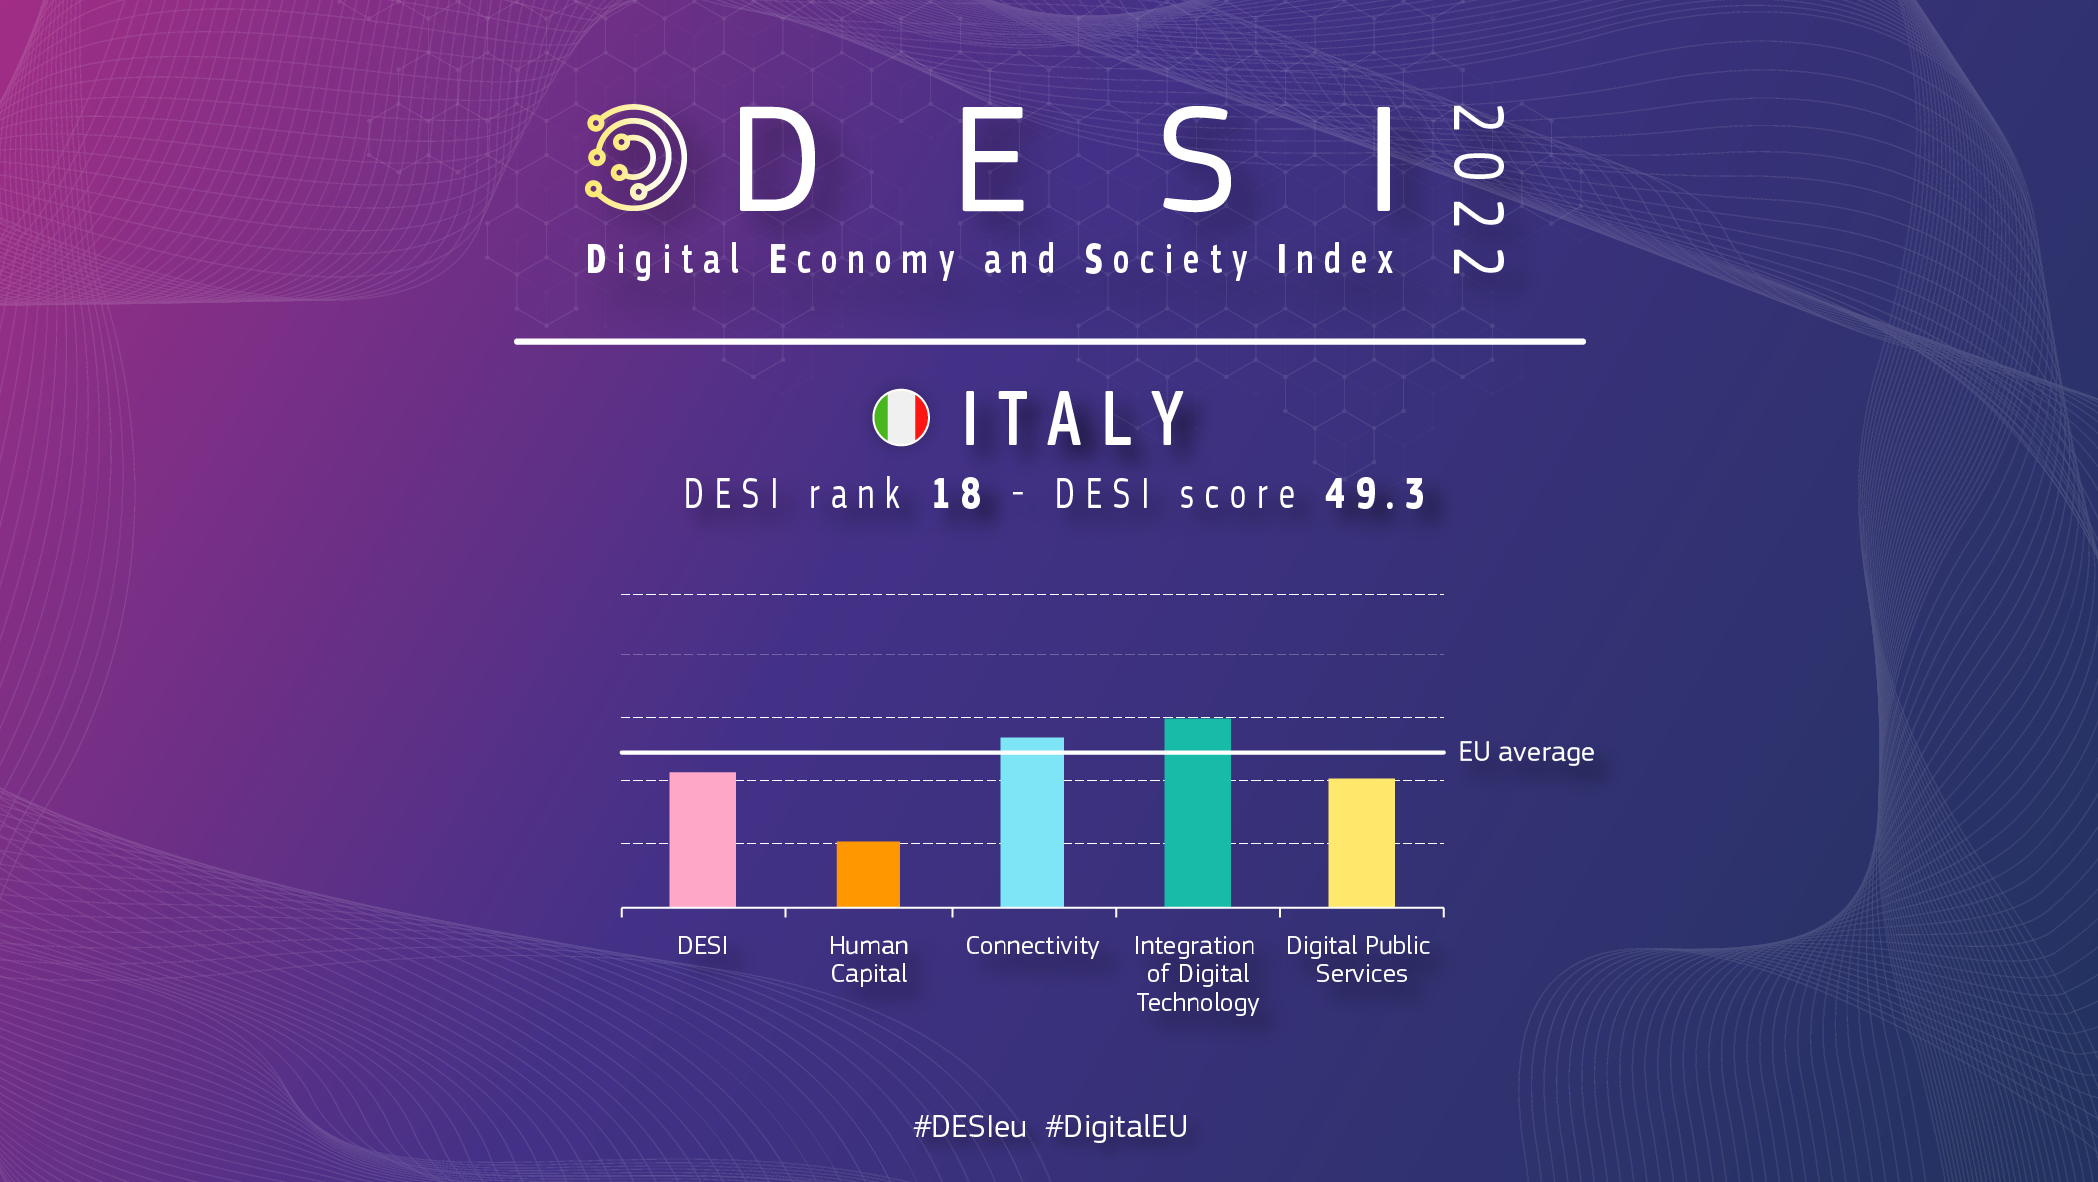 Graphic overview of Italy in DESI showing a ranking of 18 with a score of 49.3